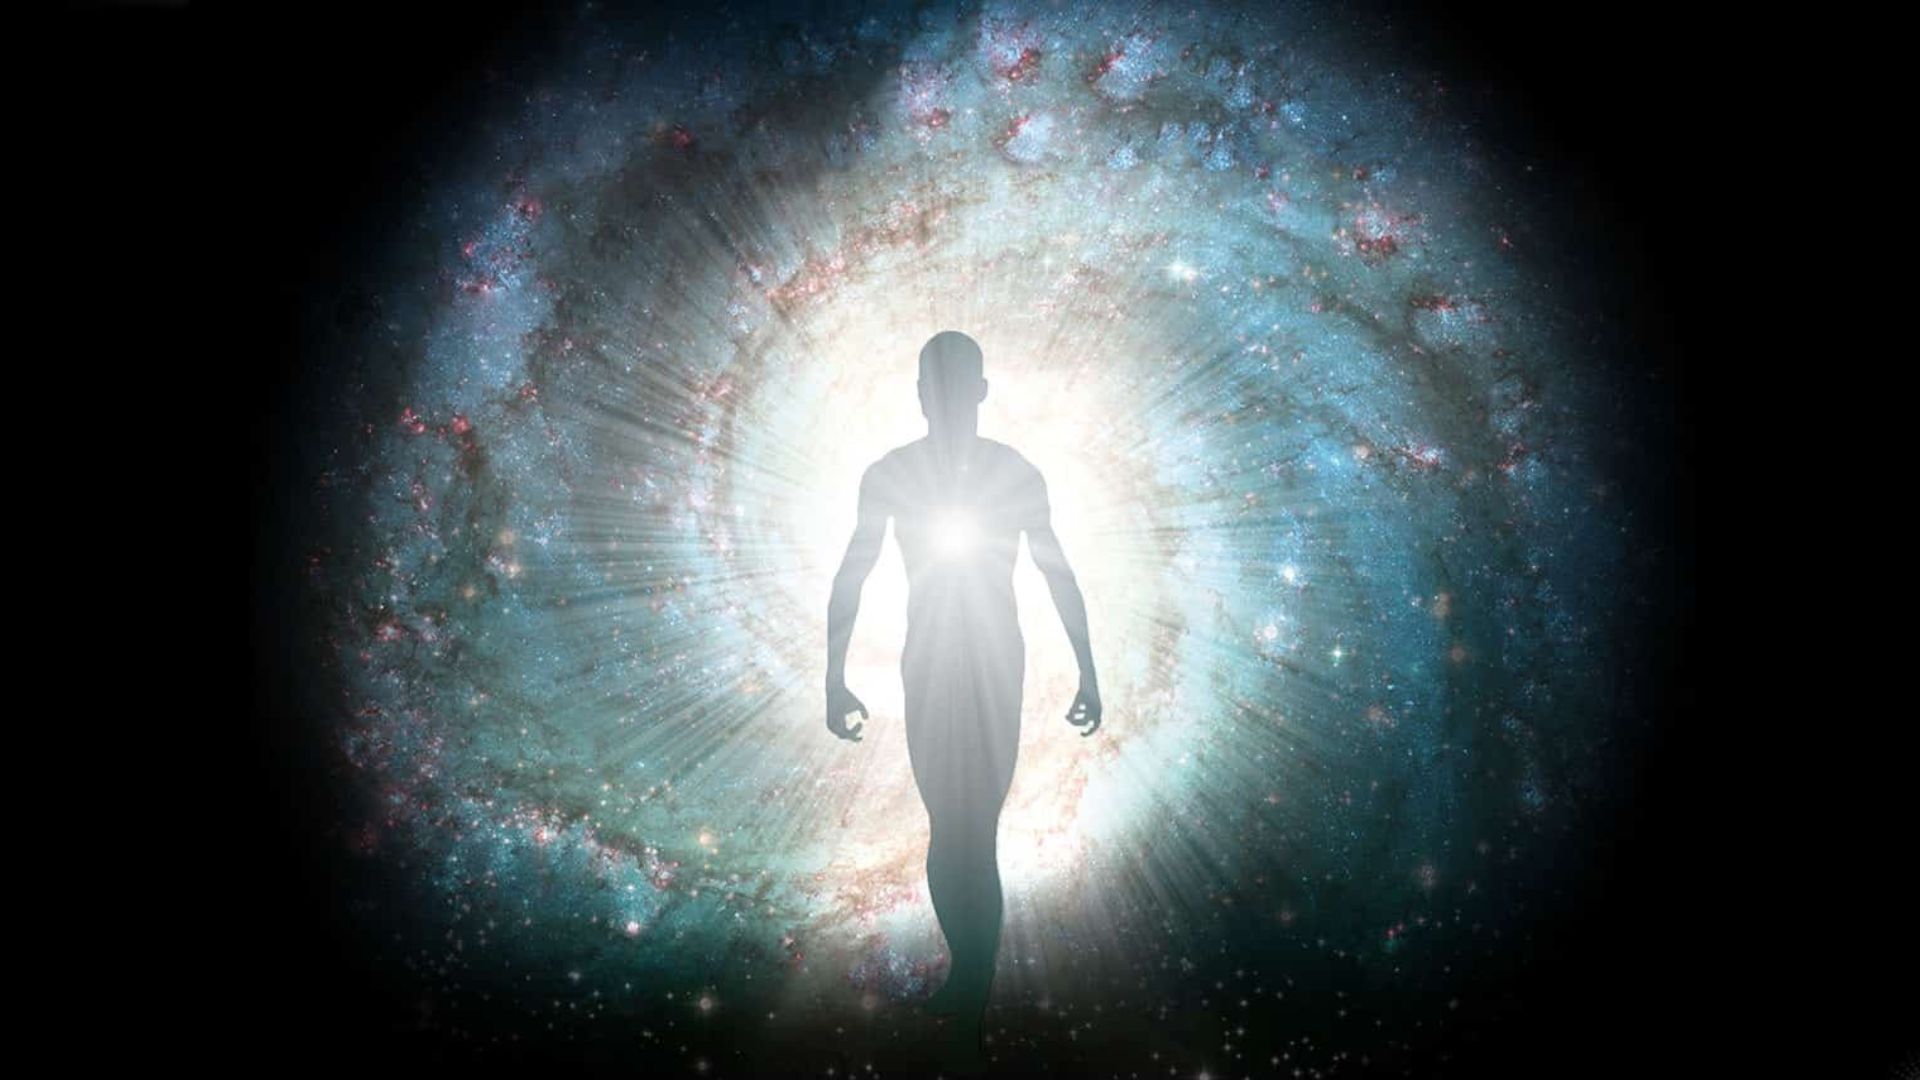 What Are The Rules Of Reincarnation - The Science And Spirituality Of Reincarnation